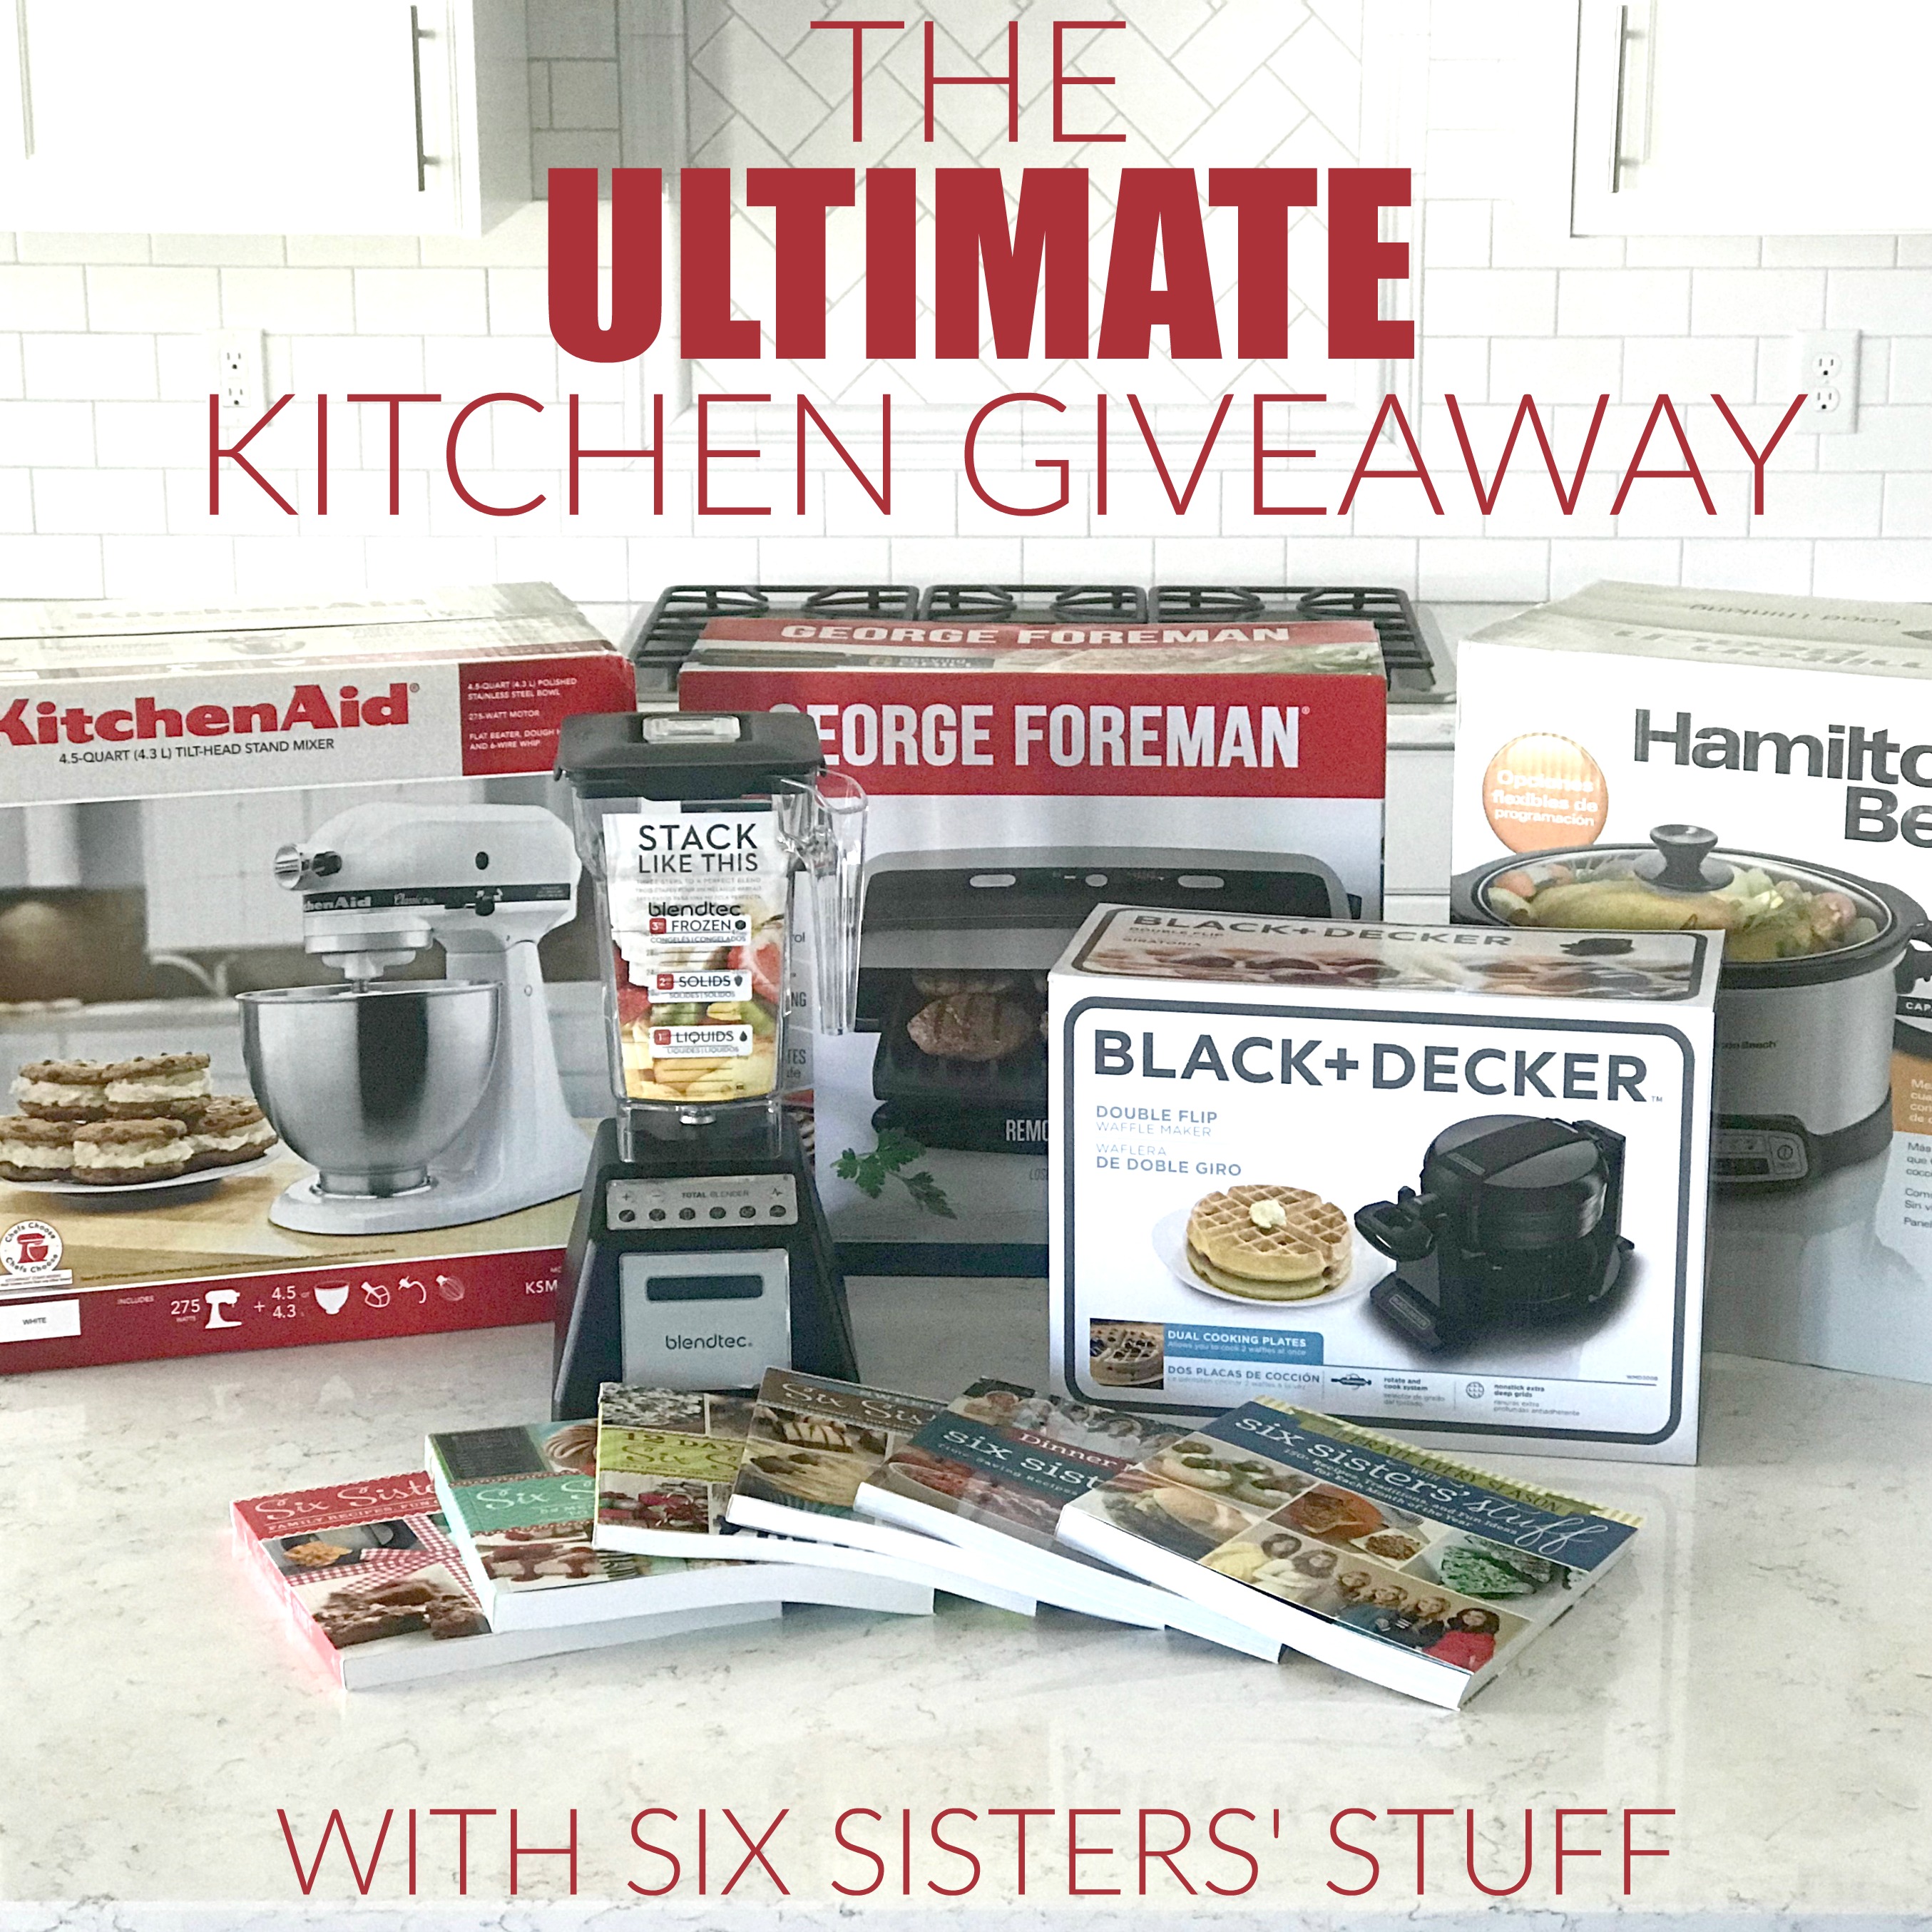 The ULTIMATE Kitchen Giveaway!